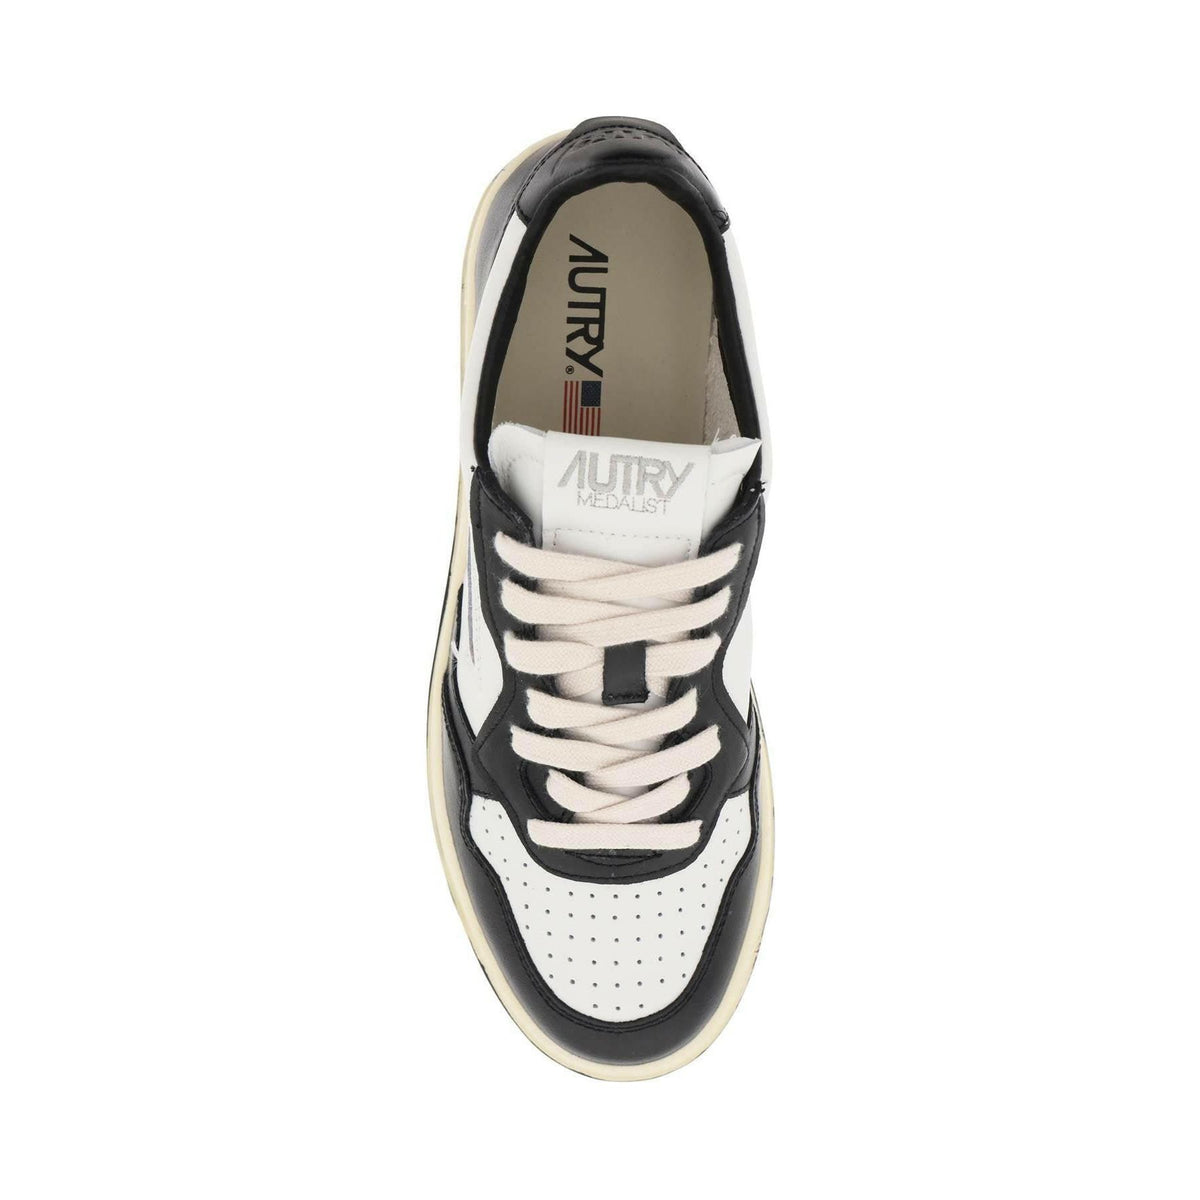 White and Black Medalist Low Leather Sneakers AUTRY JOHN JULIA.